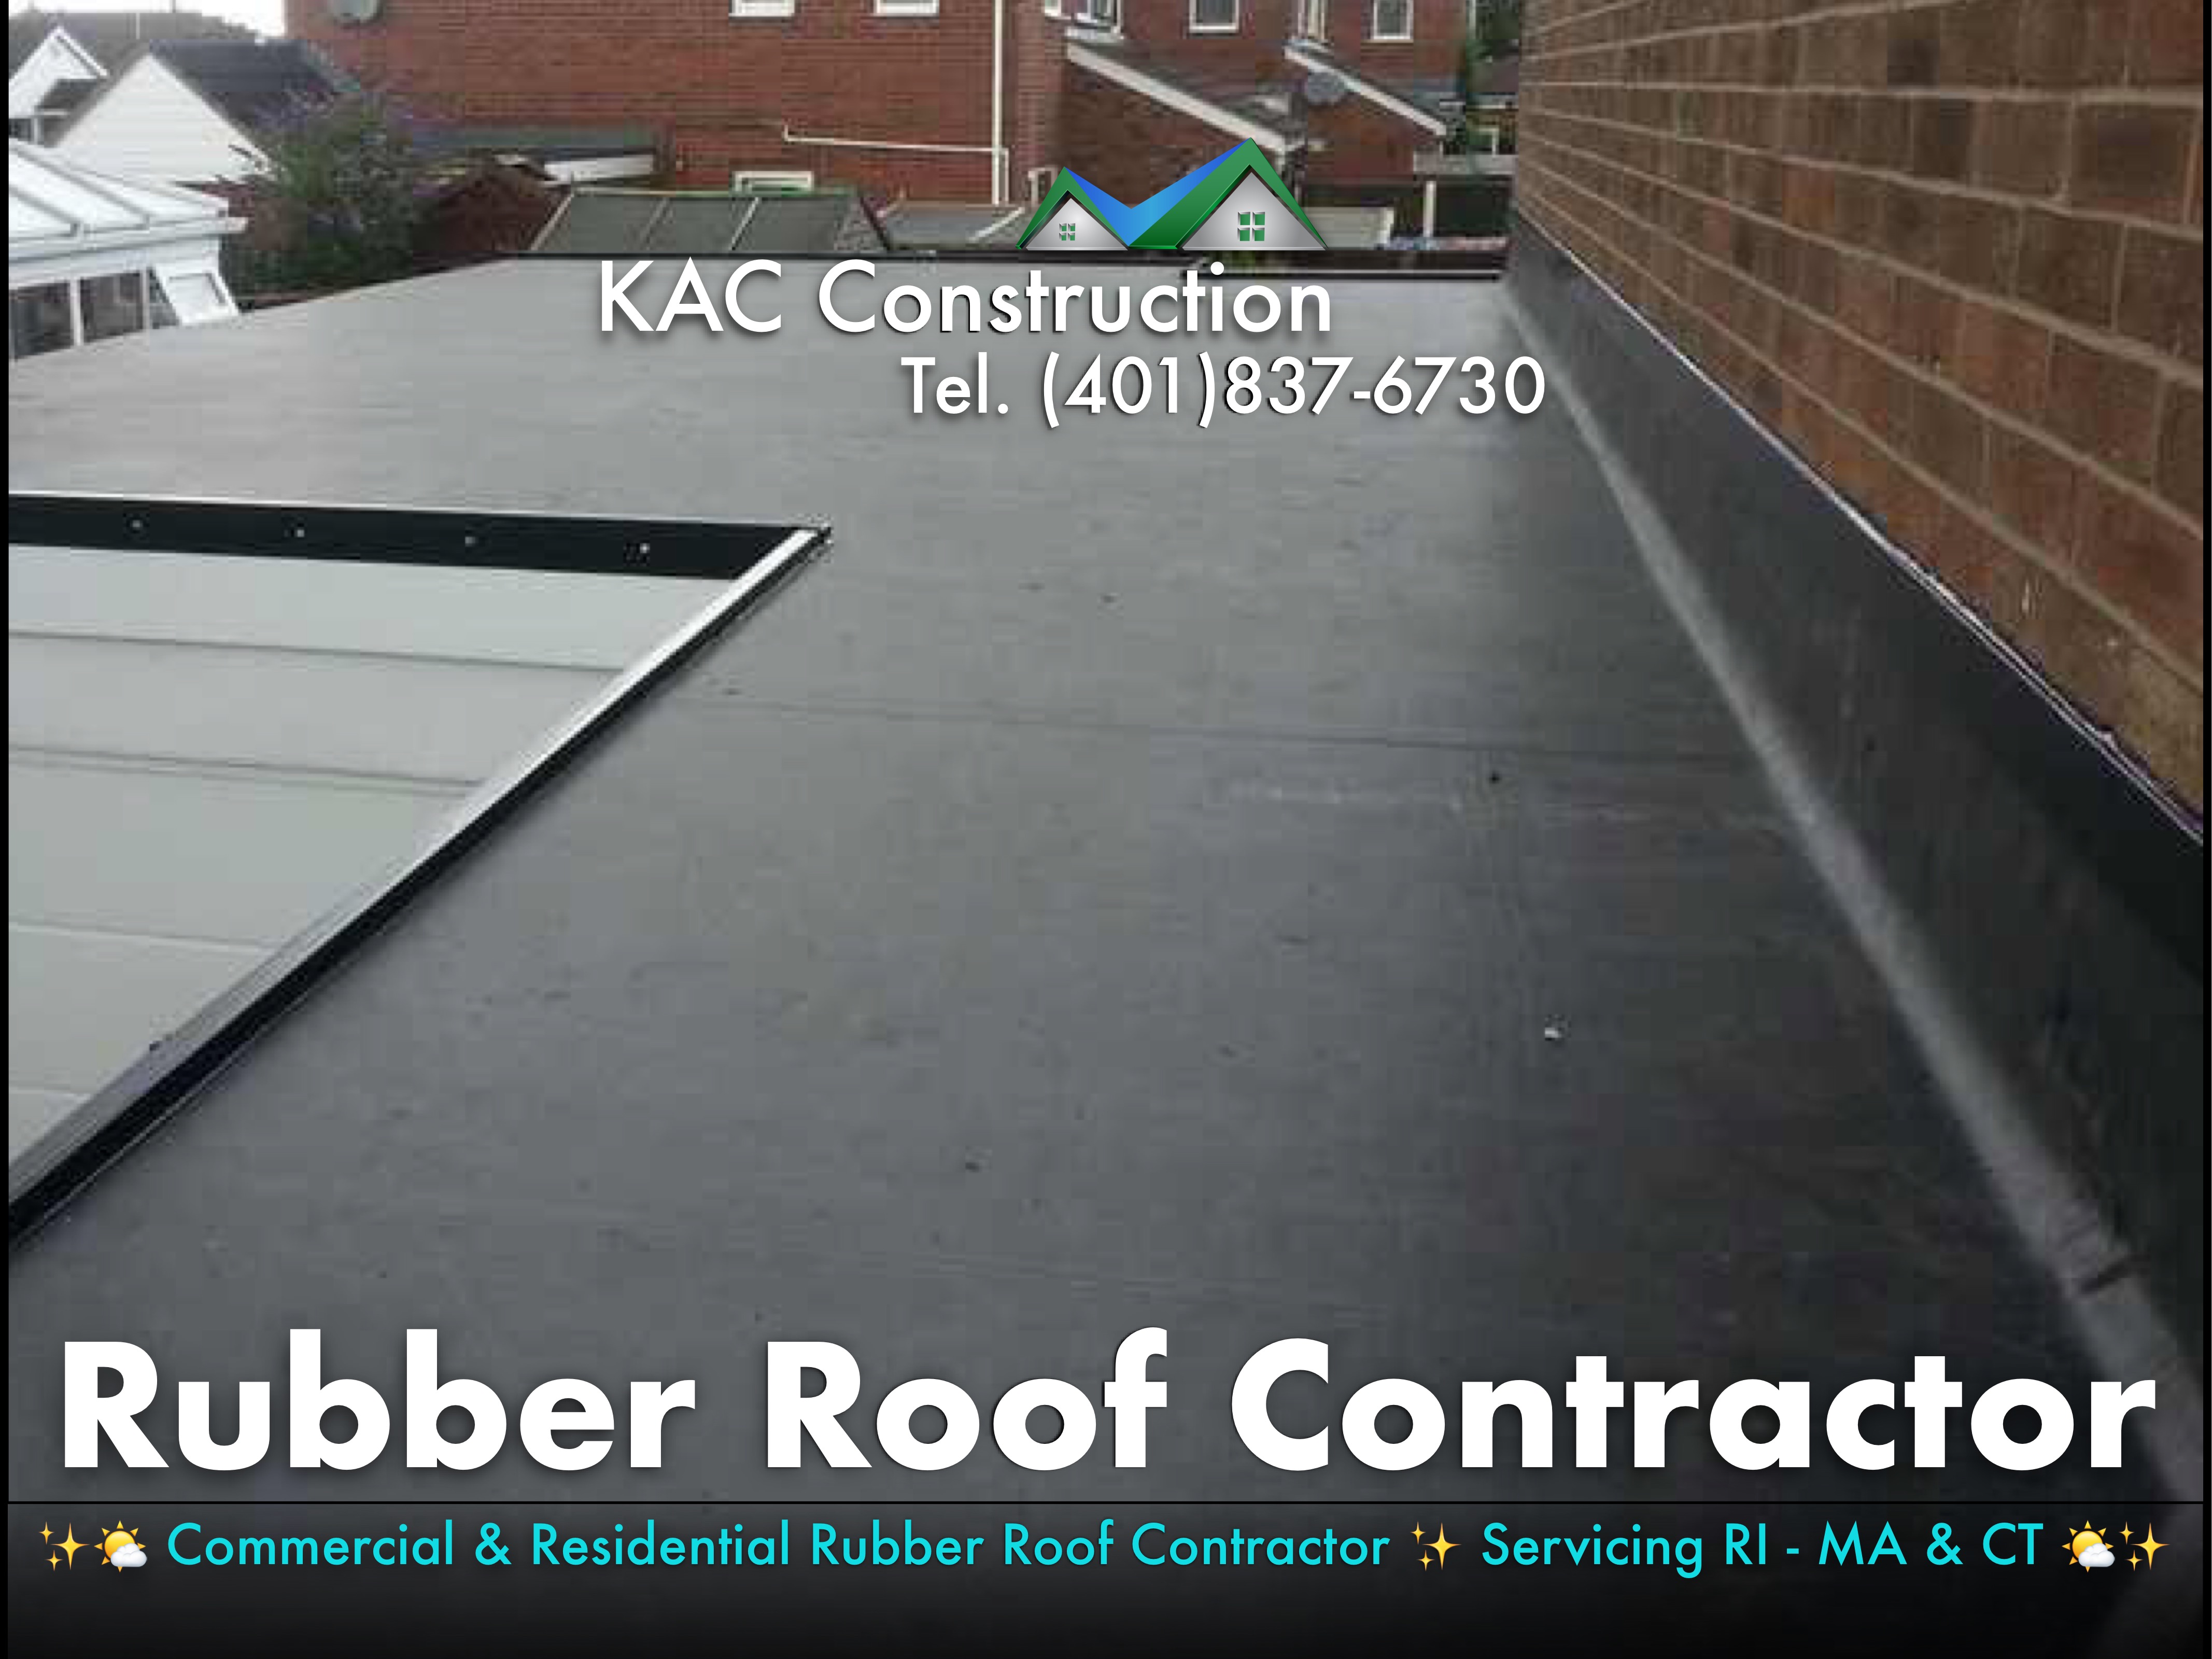 RUBBER ROOFING , RUBBER ROOFING PROVIDENCE, RUBBER ROOFING PROVIDENCE RI, RUBBER ROOFING IN PROVIDENCE RI, RUBBER ROOFING CONTRACTOR PROVIDENCE RI